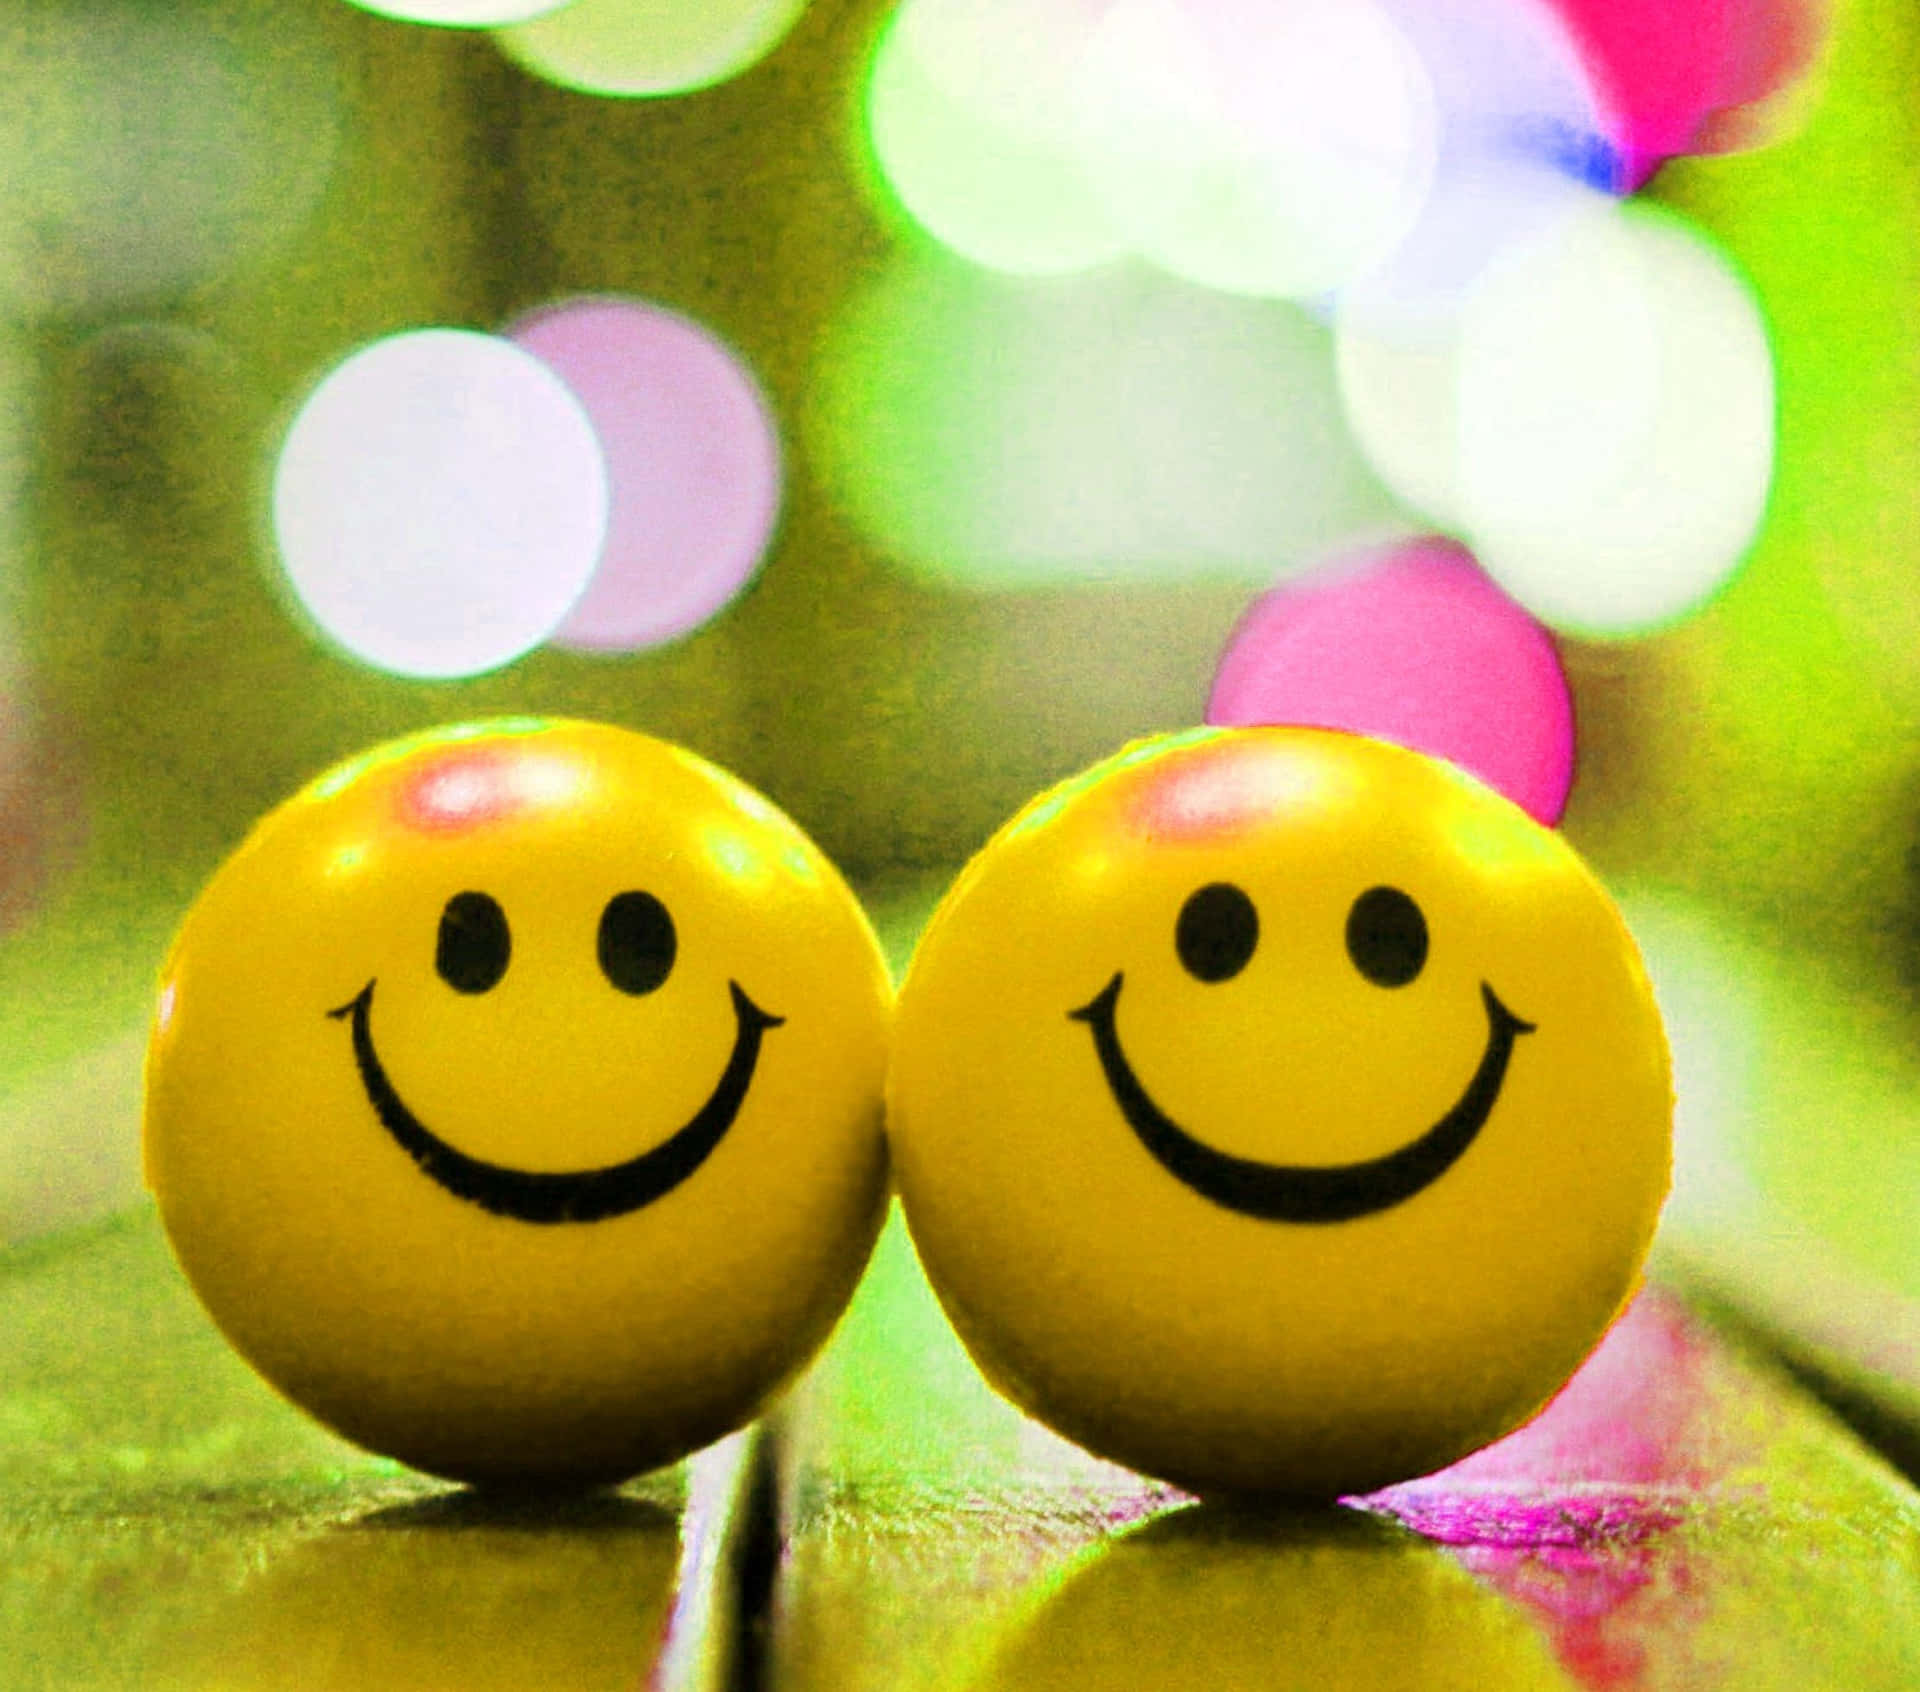 Smile DP for Whatsapp, Smile and Be Happy, HD phone wallpaper